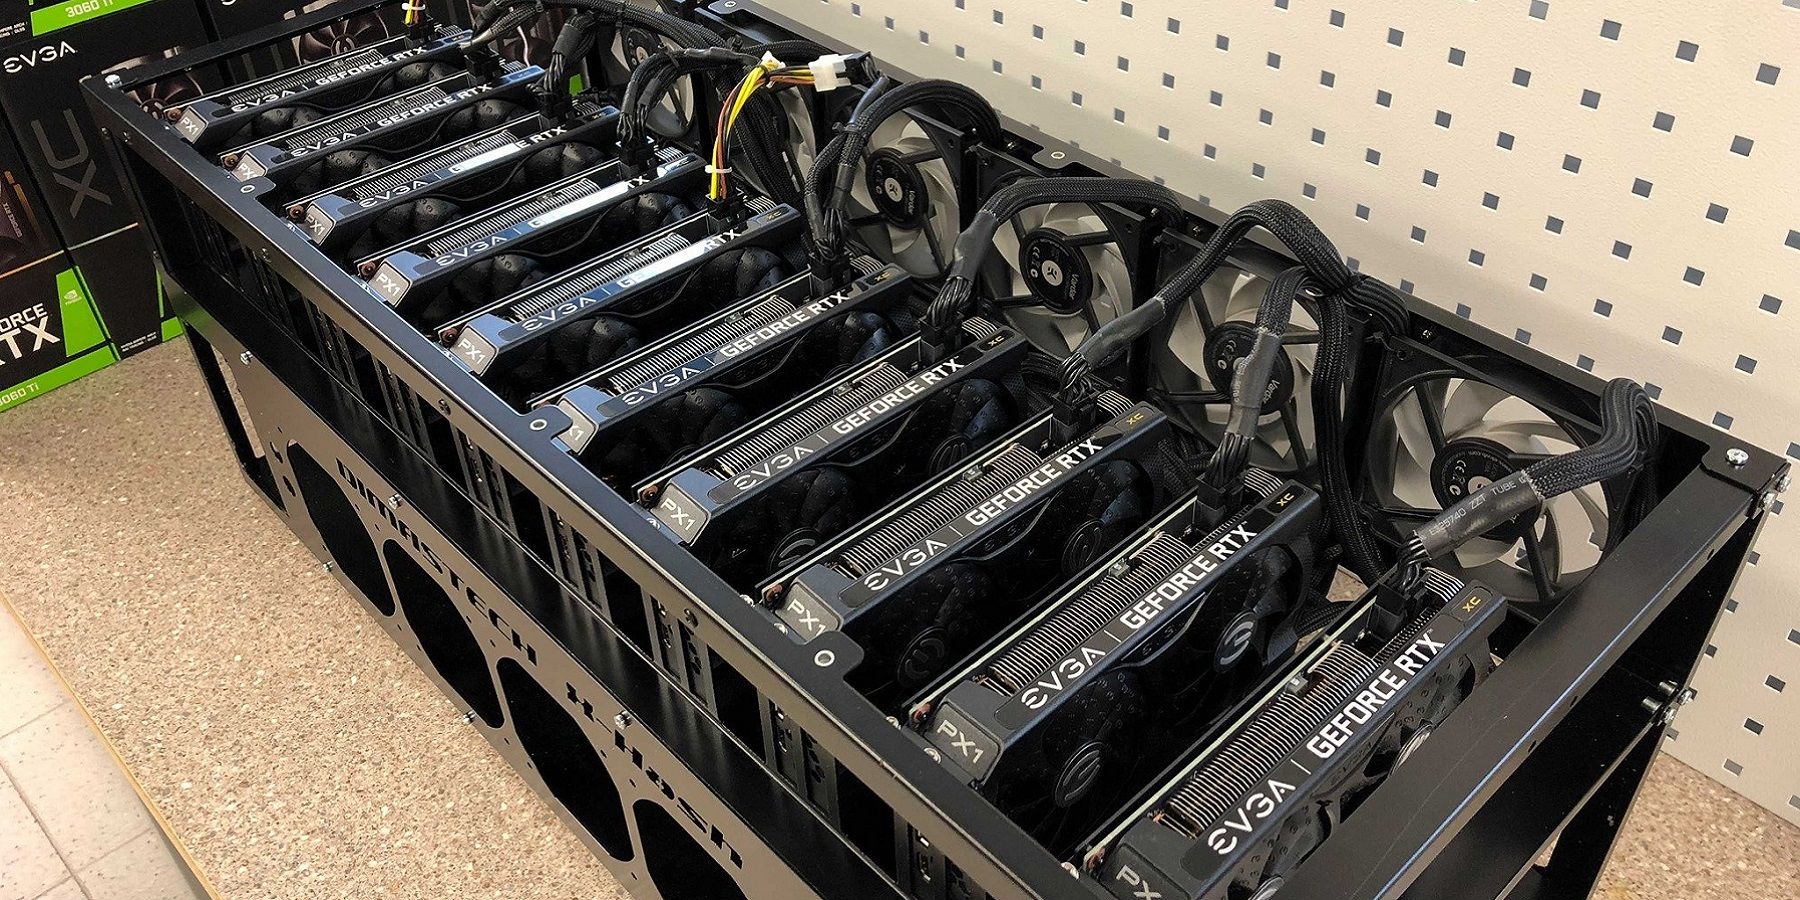 Photo of some Nvidia RTX graphics cards together in a mining farm.